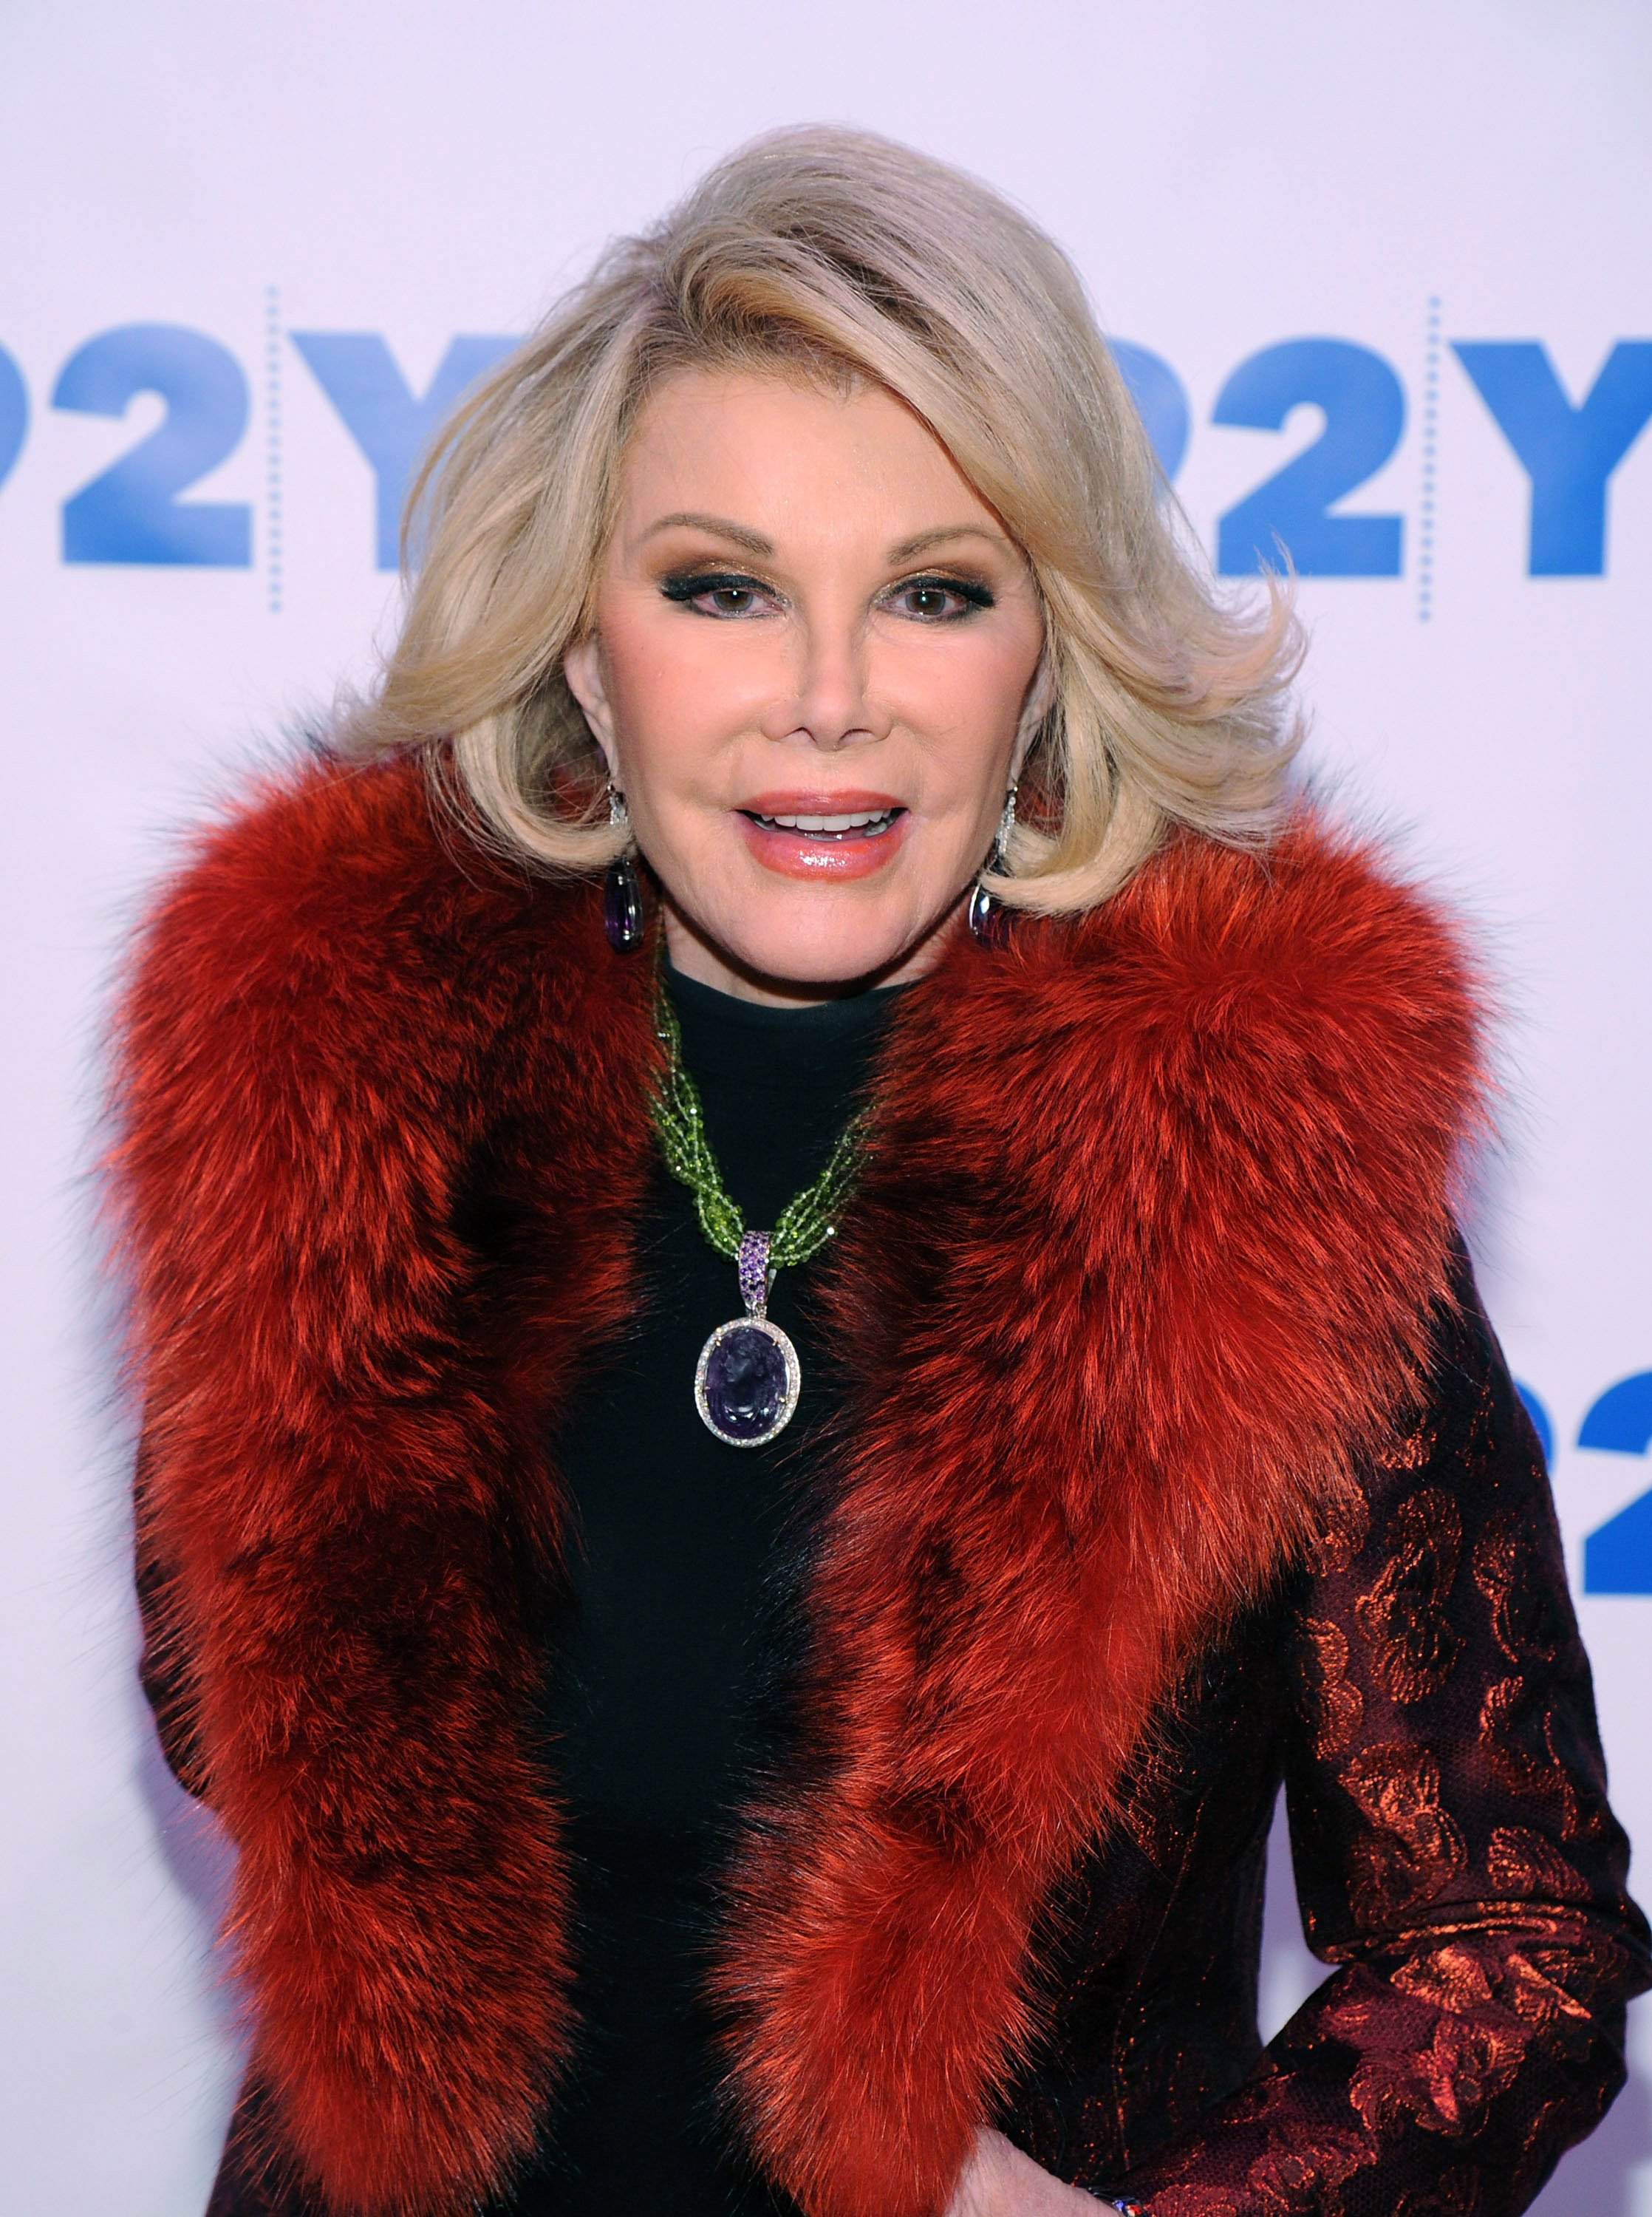  Joan Rivers attends An Evening With Joan And Melissa Rivers on January 22, 2014 | Photo: GettyImages